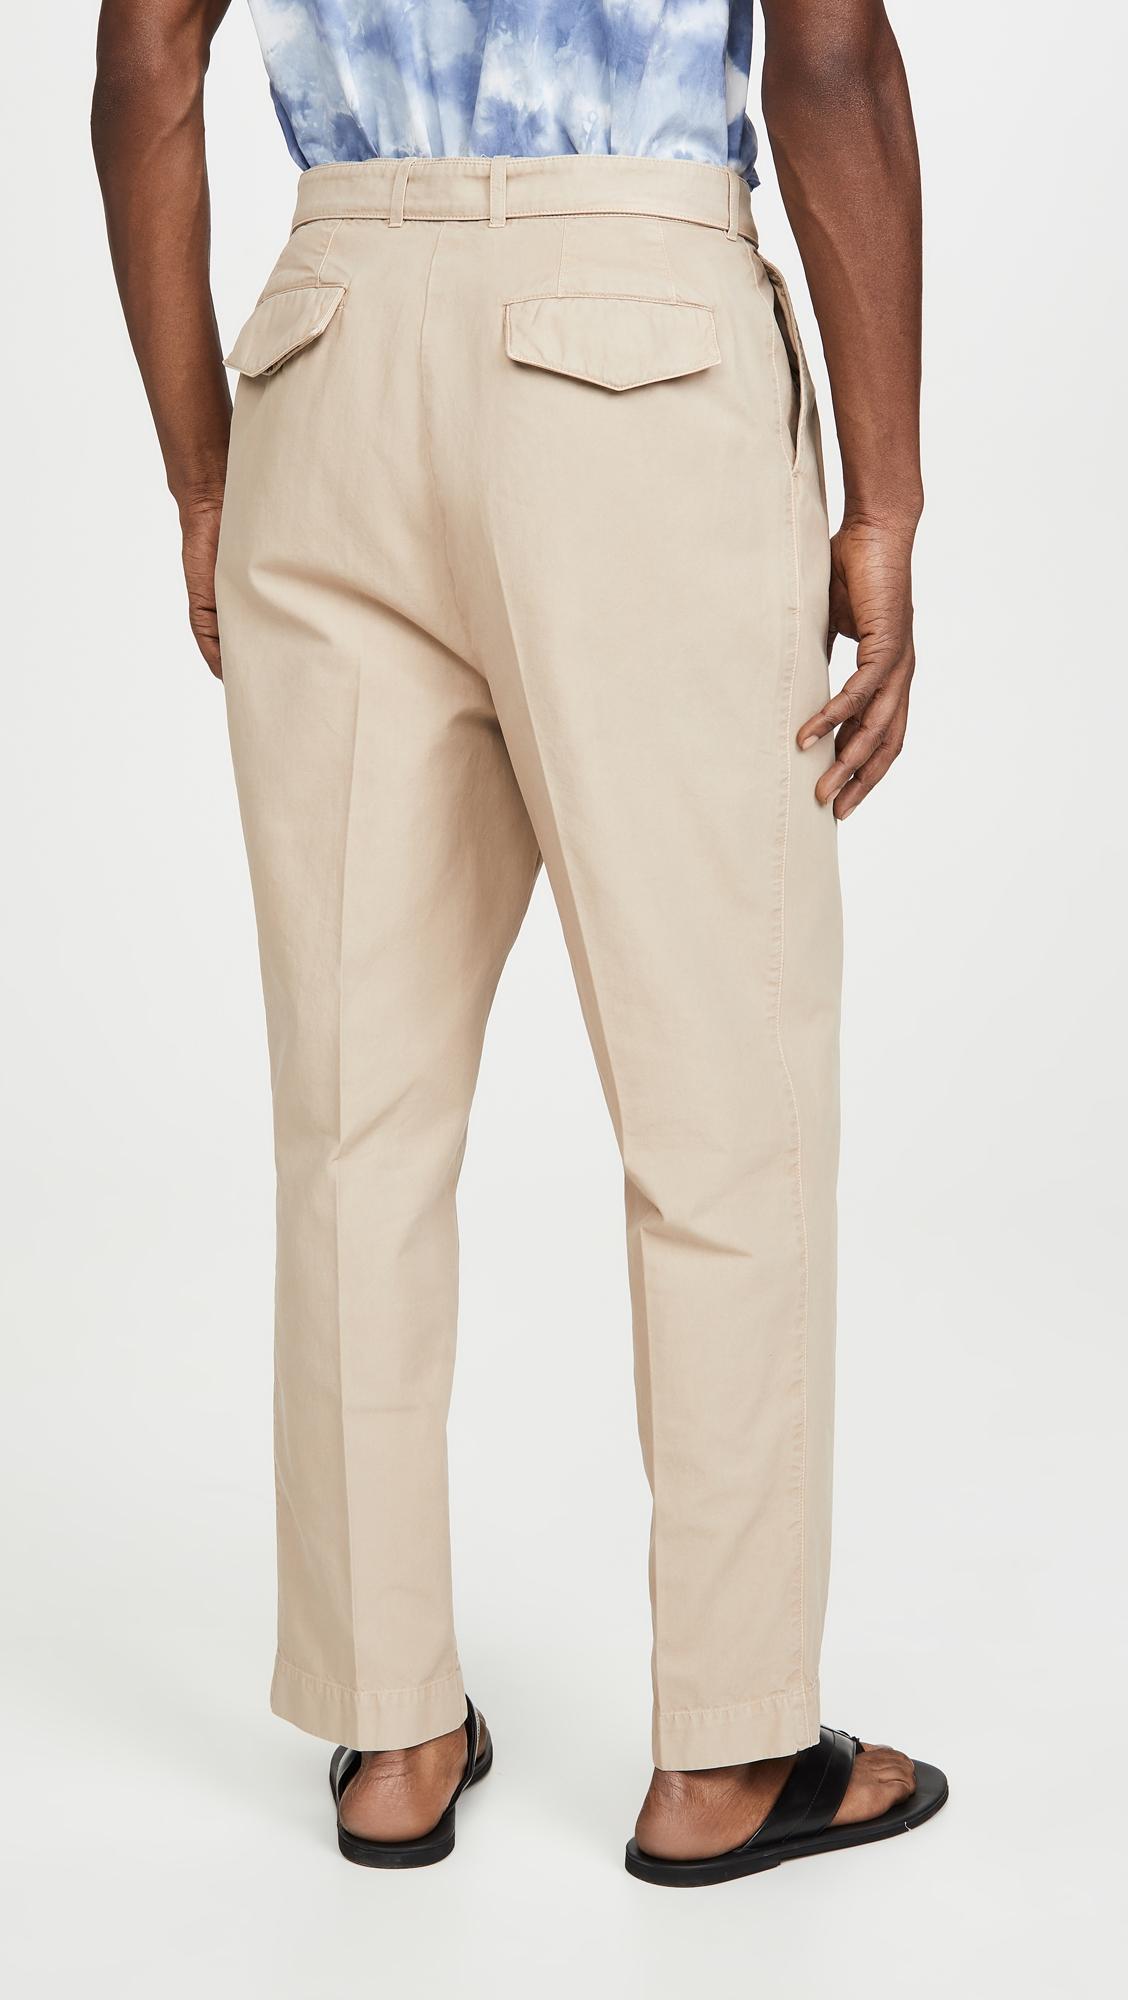 Officine Generale Italian Cotton Pleated Chino Pants in Burnt Sand ...